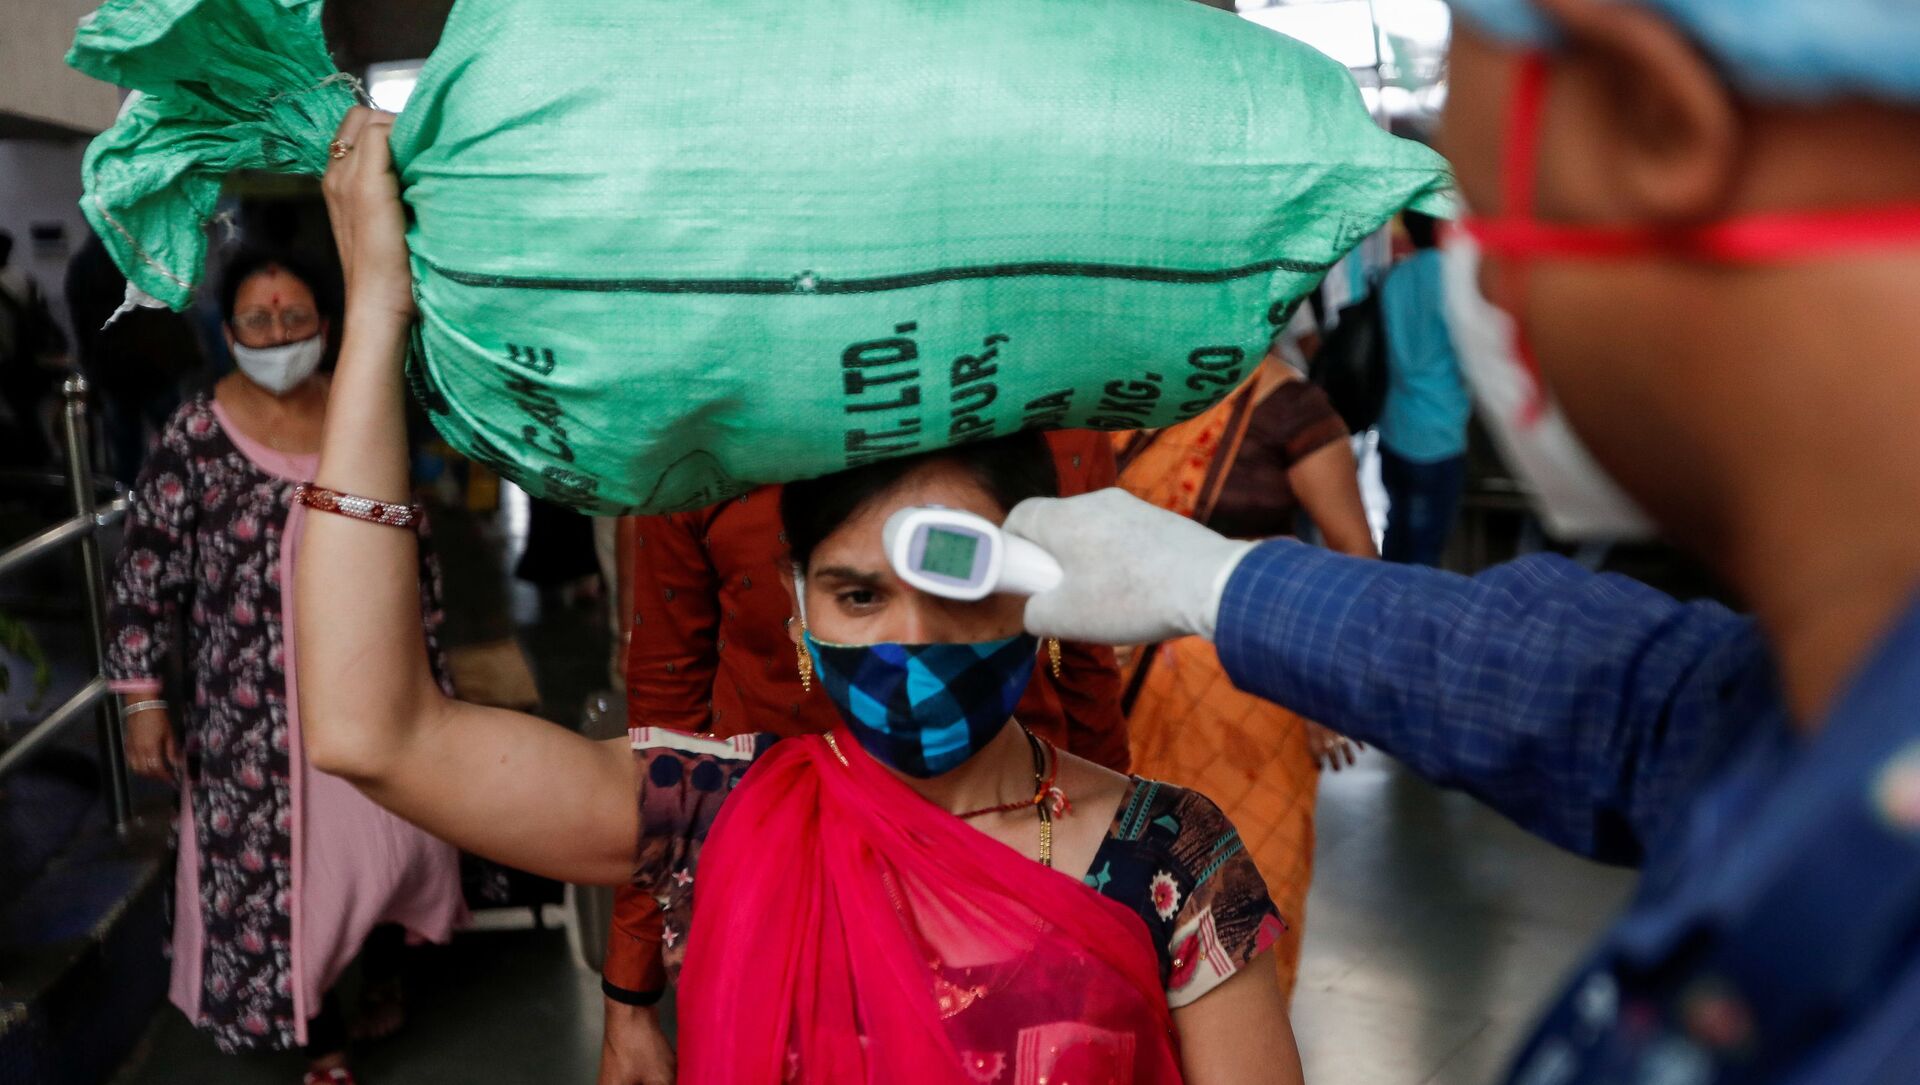 A health worker checks the temperature of a passenger, amid the spread of the coronavirus disease (COVID-19), at a railway station in Mumbai, India, March 17, 2021 - Sputnik International, 1920, 21.05.2021